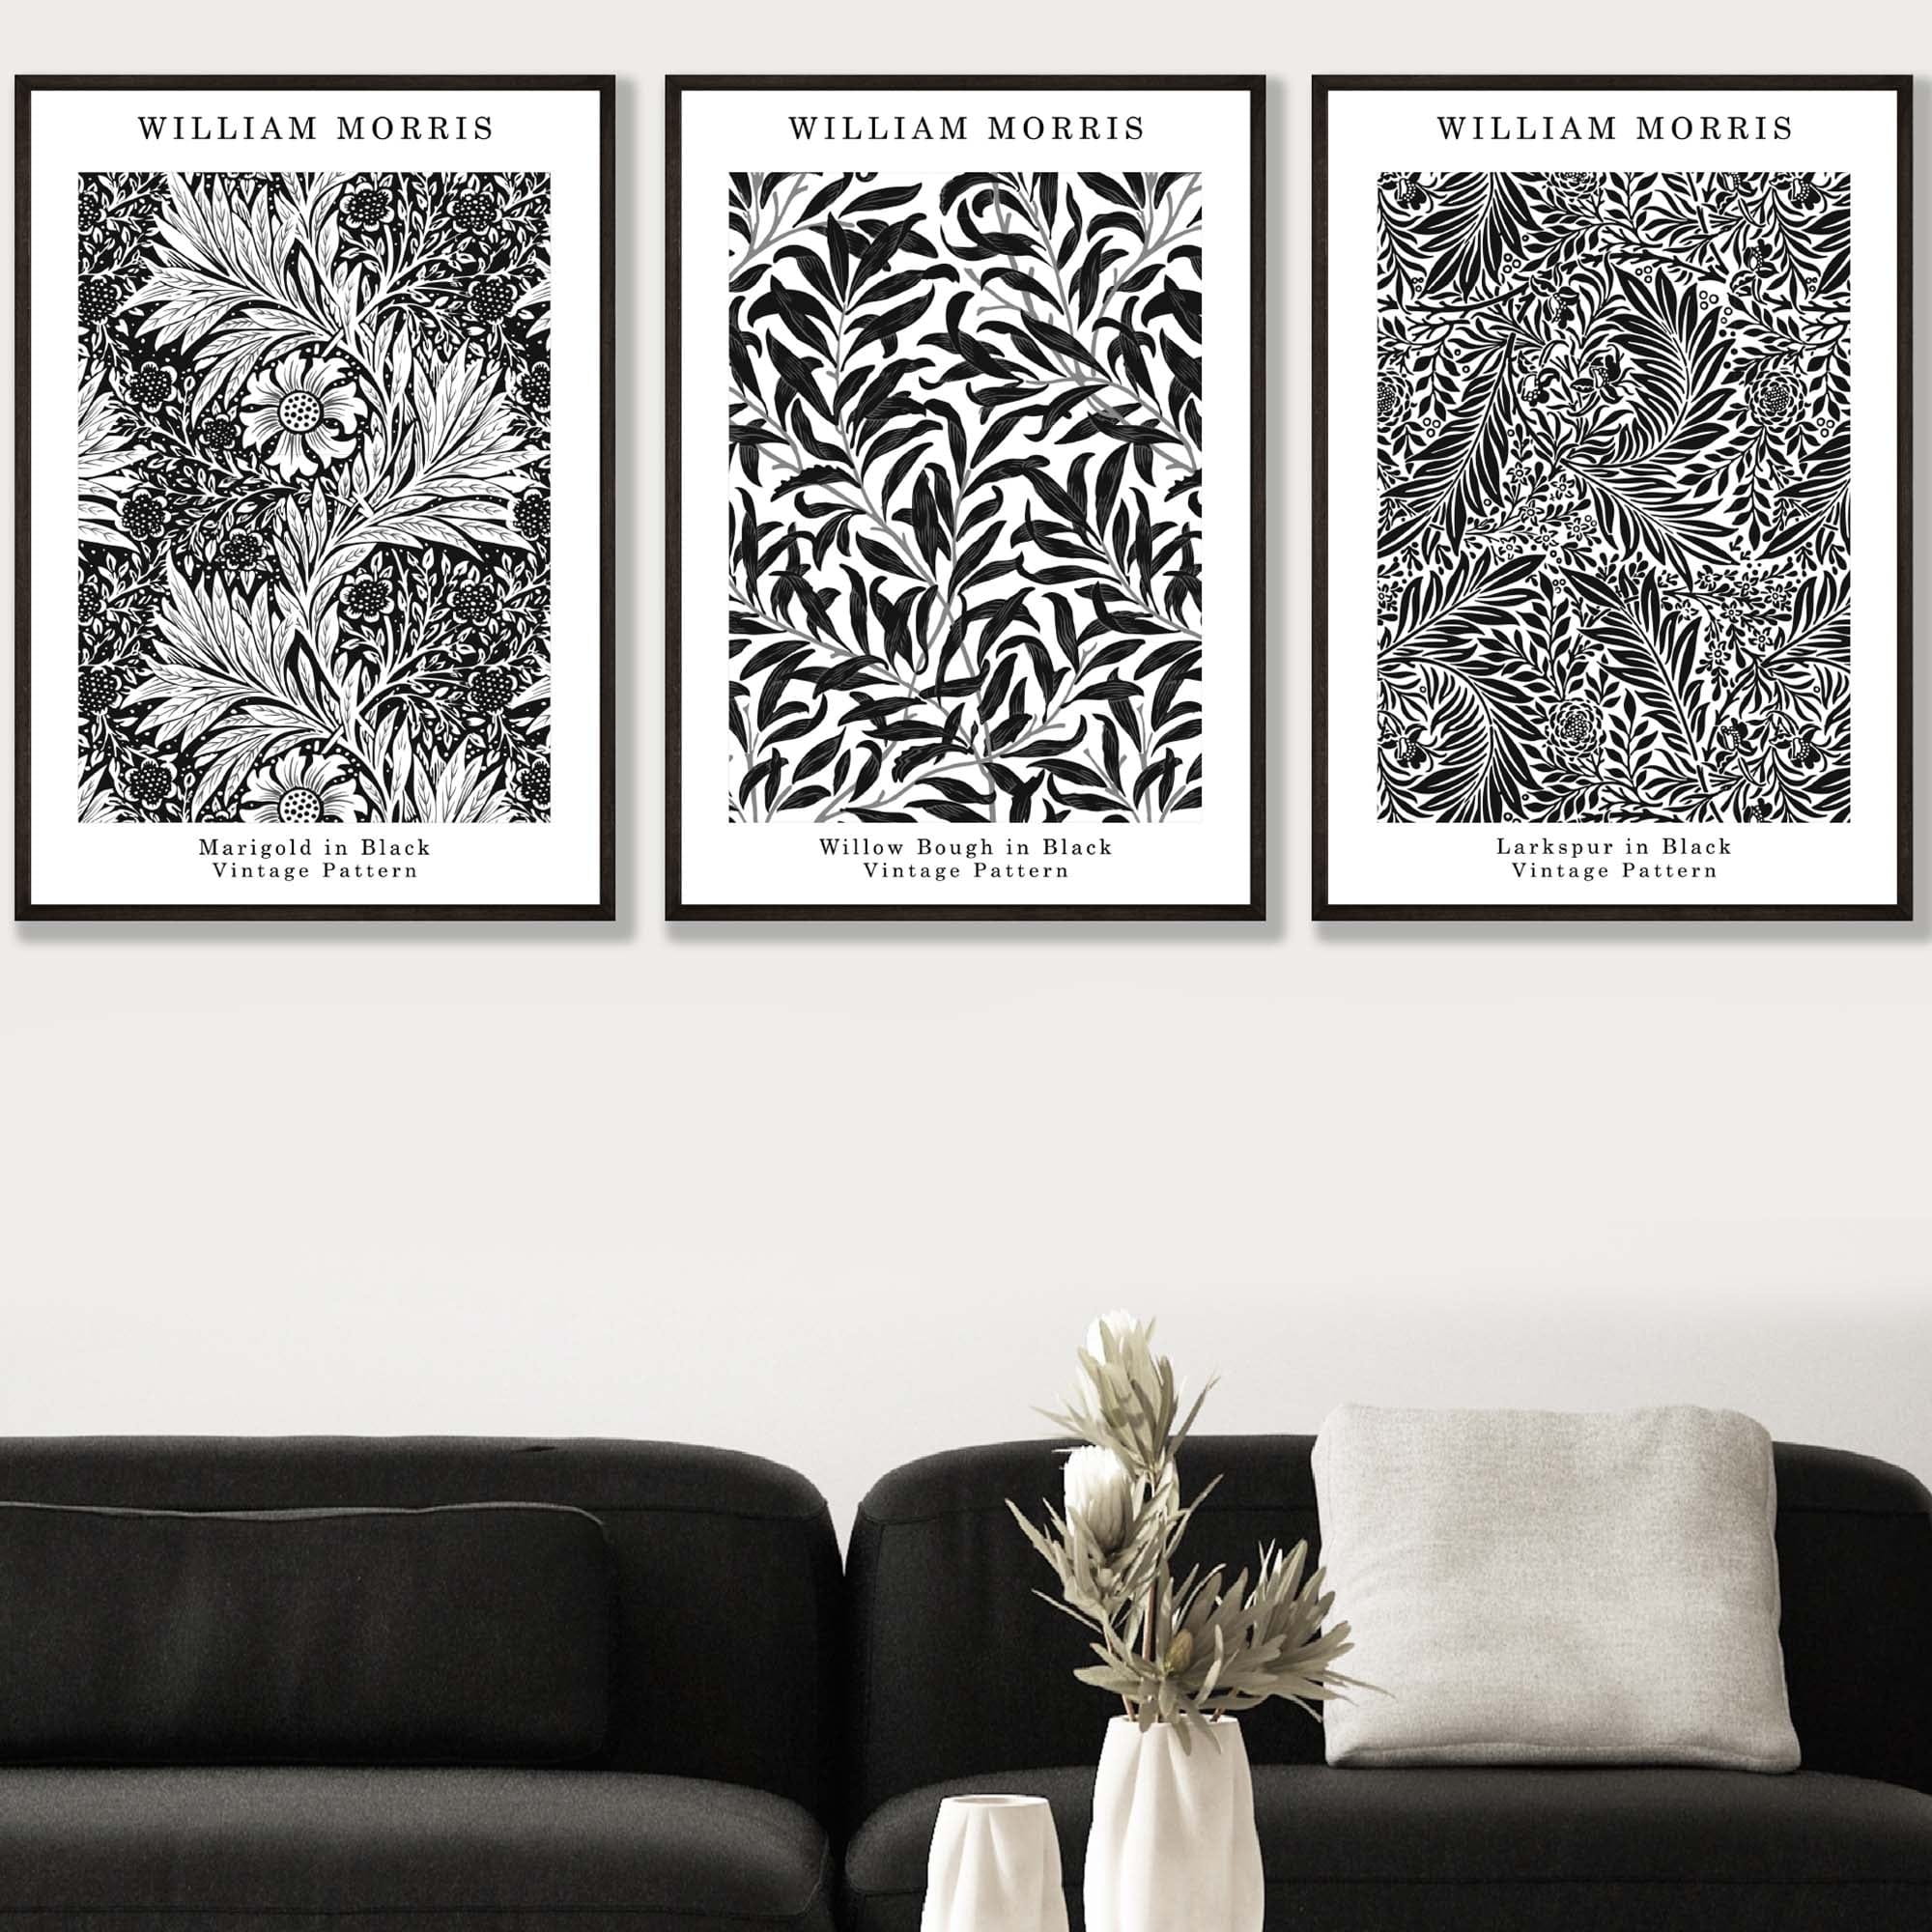 William Morris Vintage Floral Wall Art Prints in Black and White